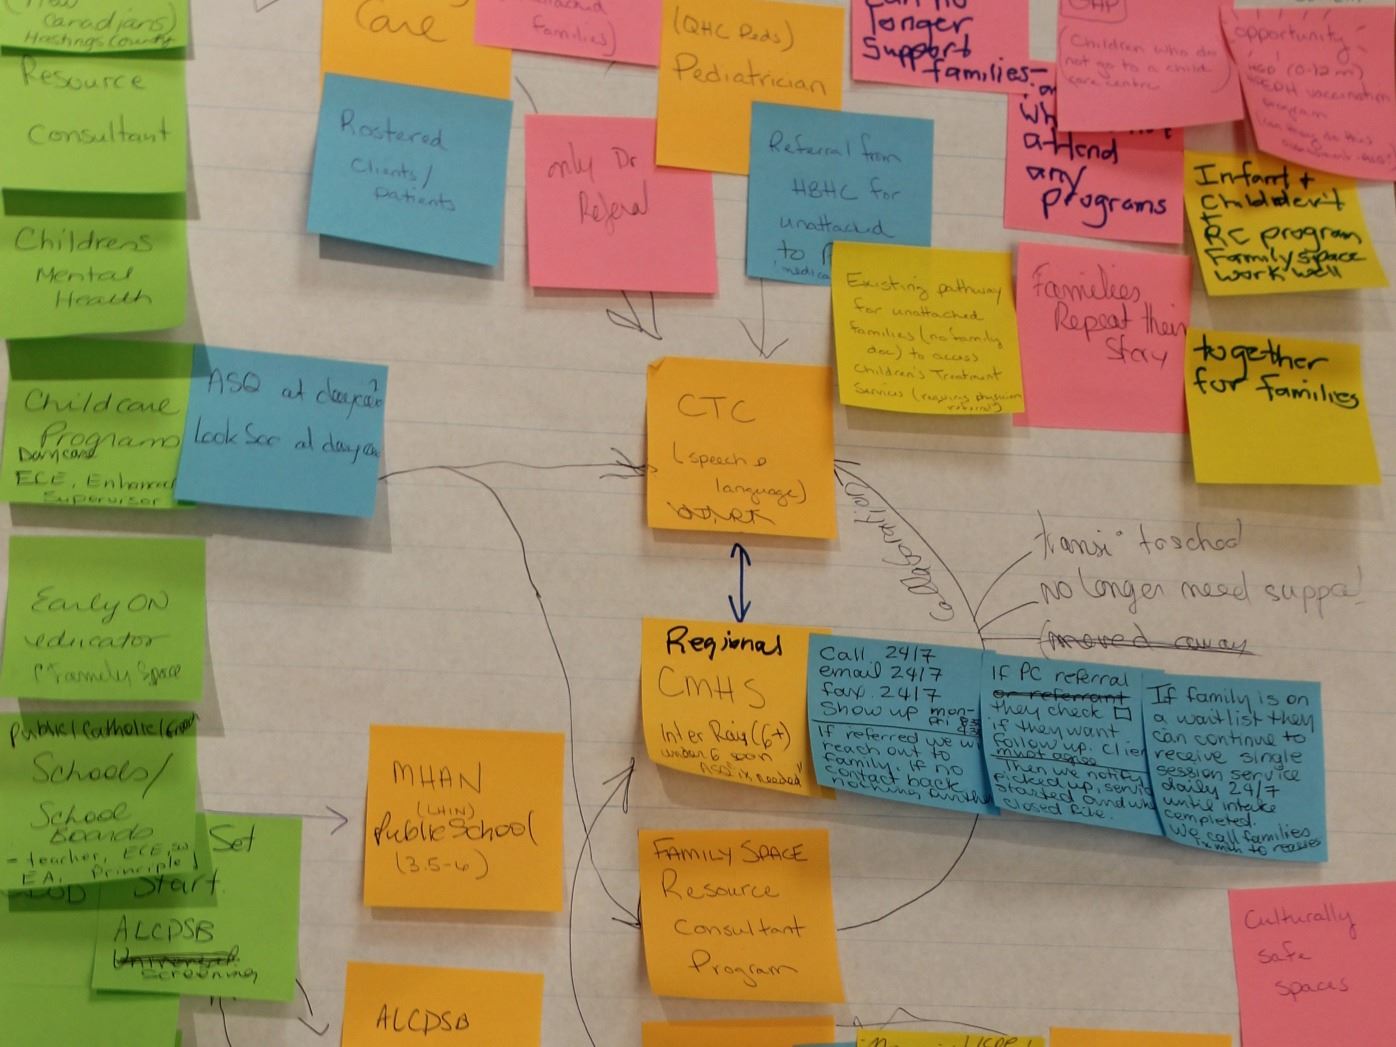 At the end of a workshop, the maps created from post its on posters, as messy as they may look, are gathered for all sectors and areas and gathered into global maps by the facilitators.